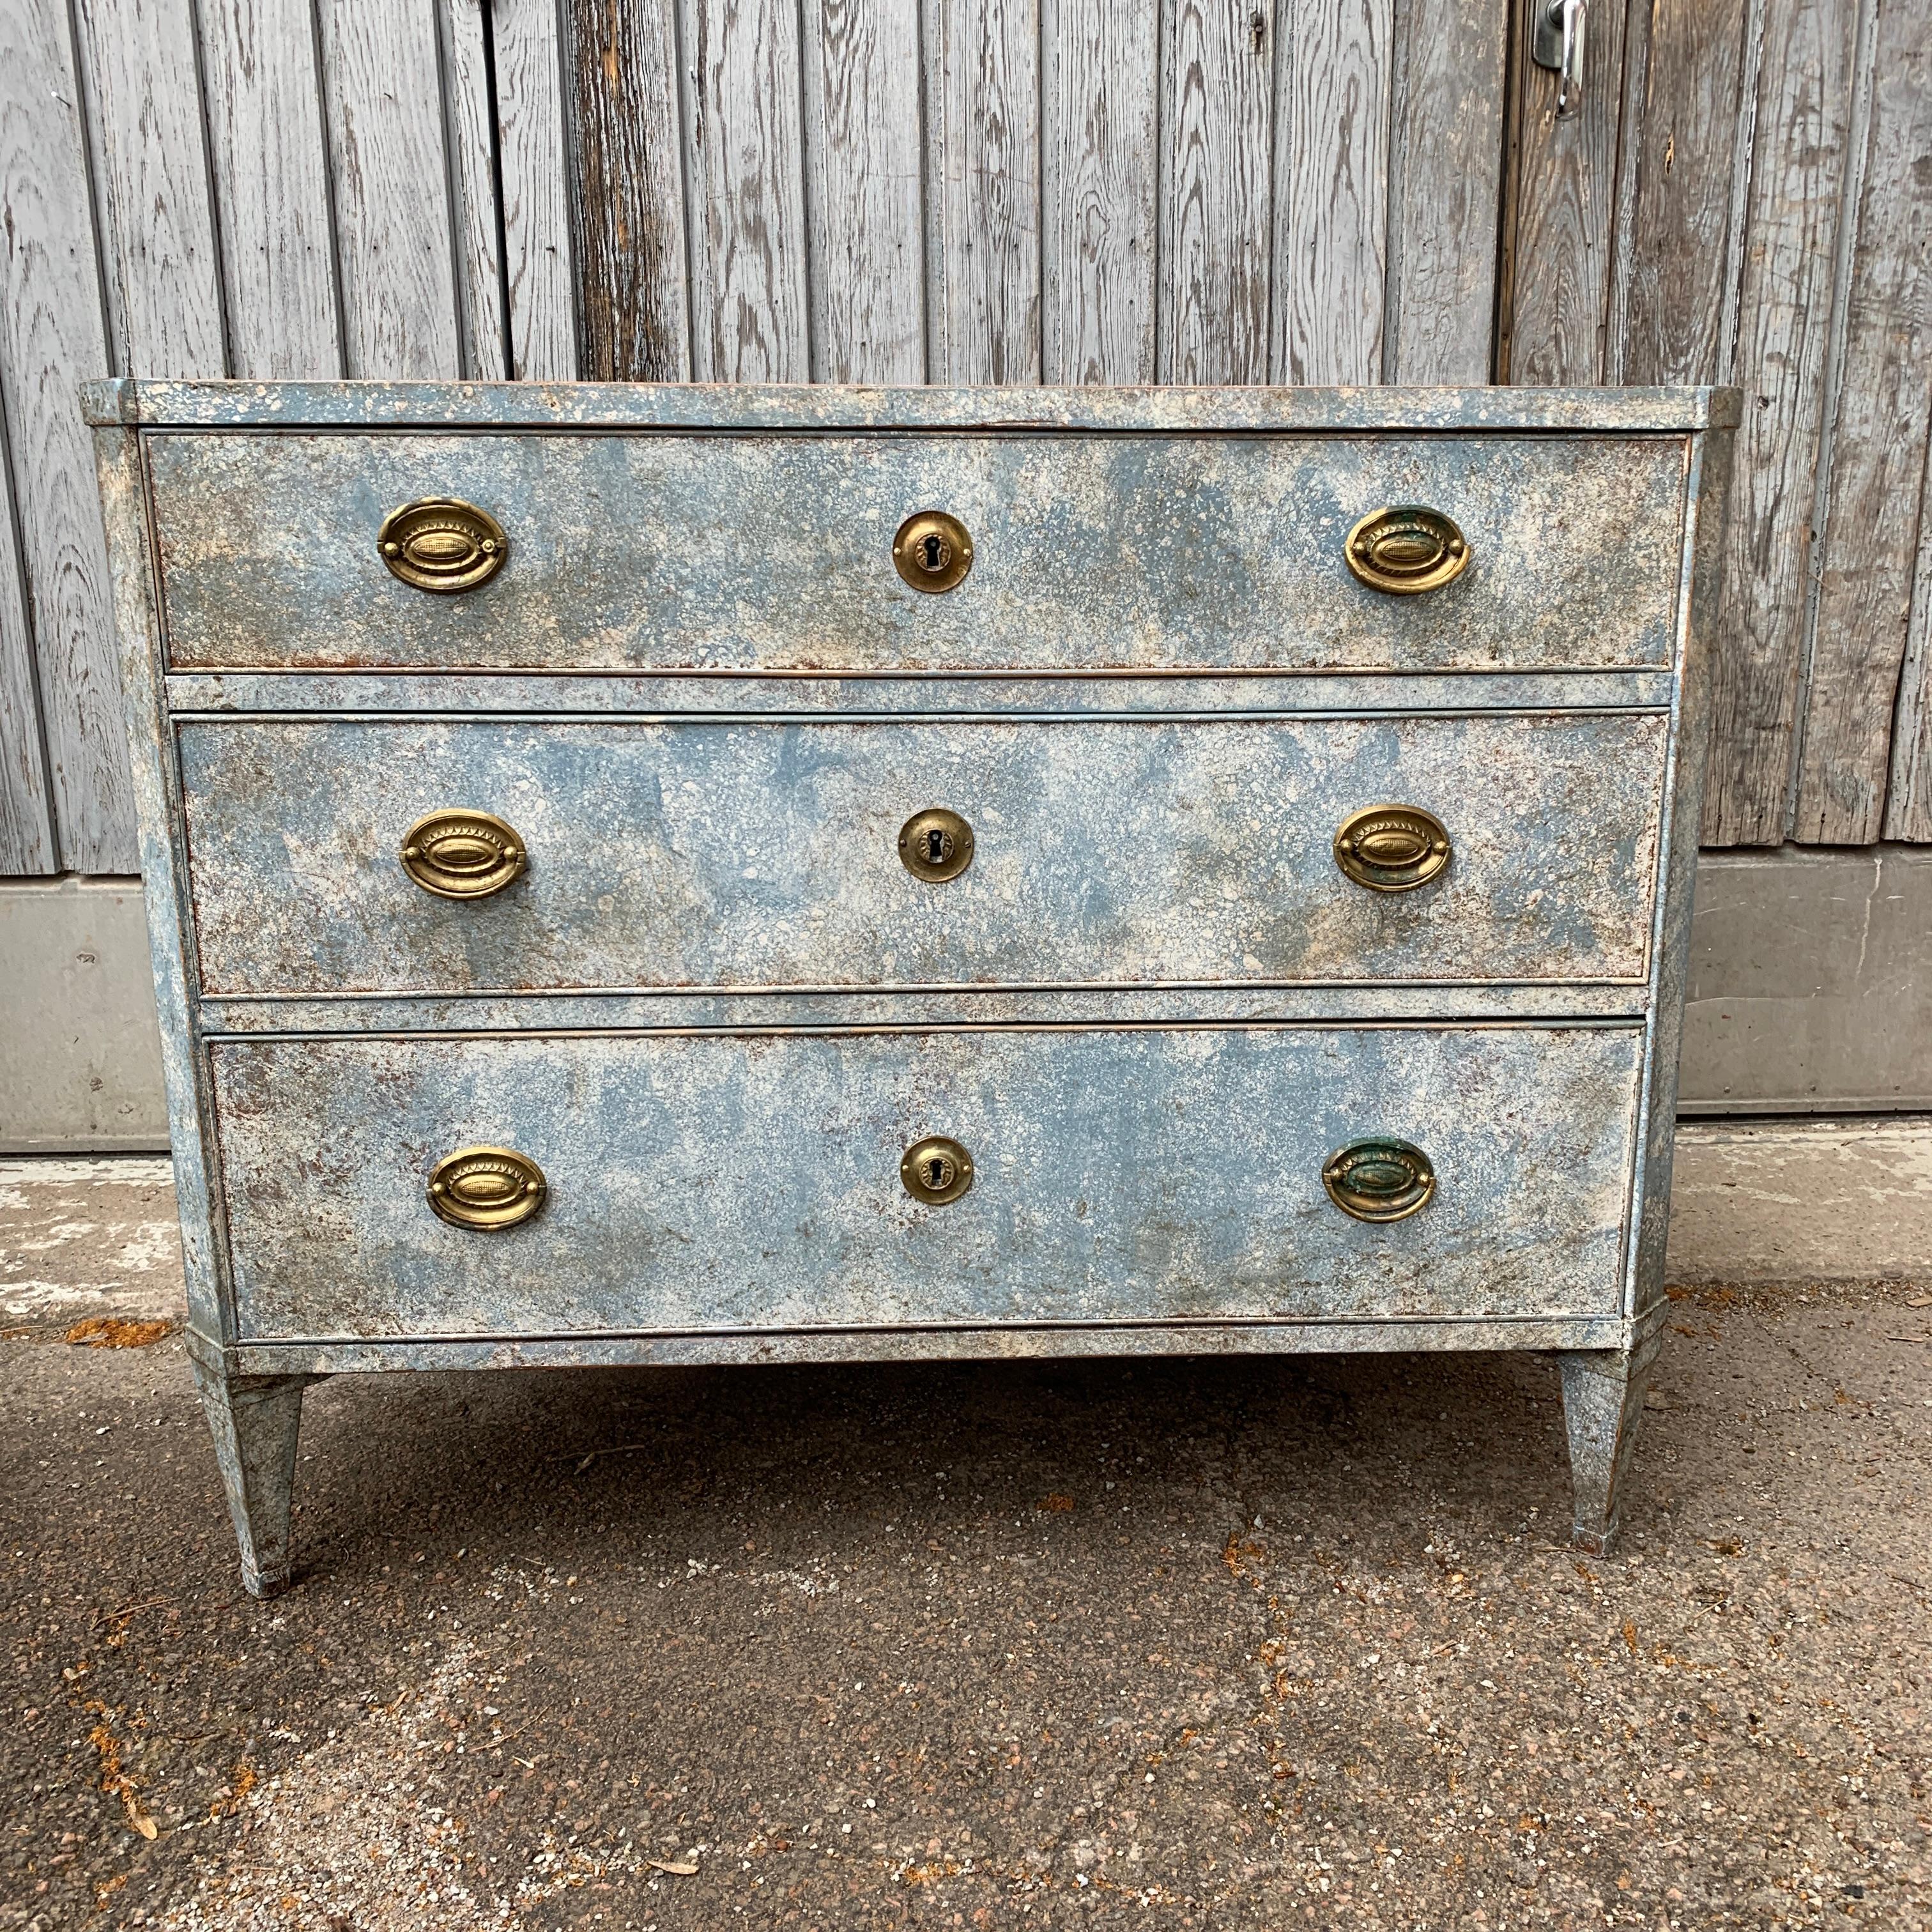 Late 18th Century Swedish 3 drawers chest with original brass hardware and its Gustavian style blue color that has been restored at a later date. The simplicity of the Scandinavian Folk Art style 